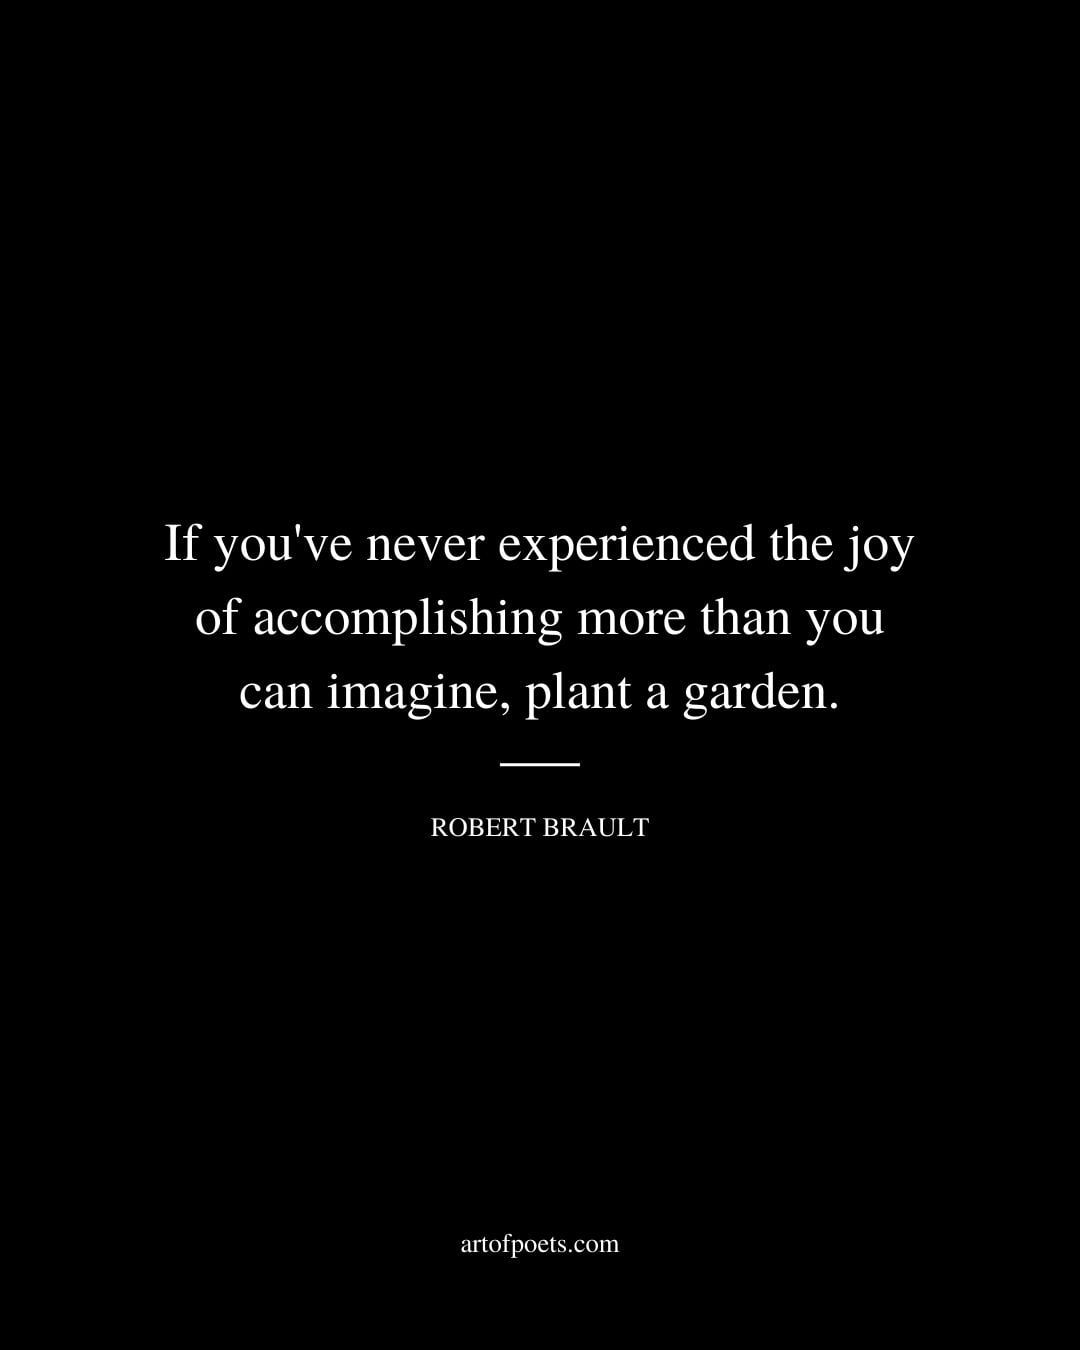 If youve never experienced the joy of accomplishing more than you can imagine plant a garden. Robert Brault 1